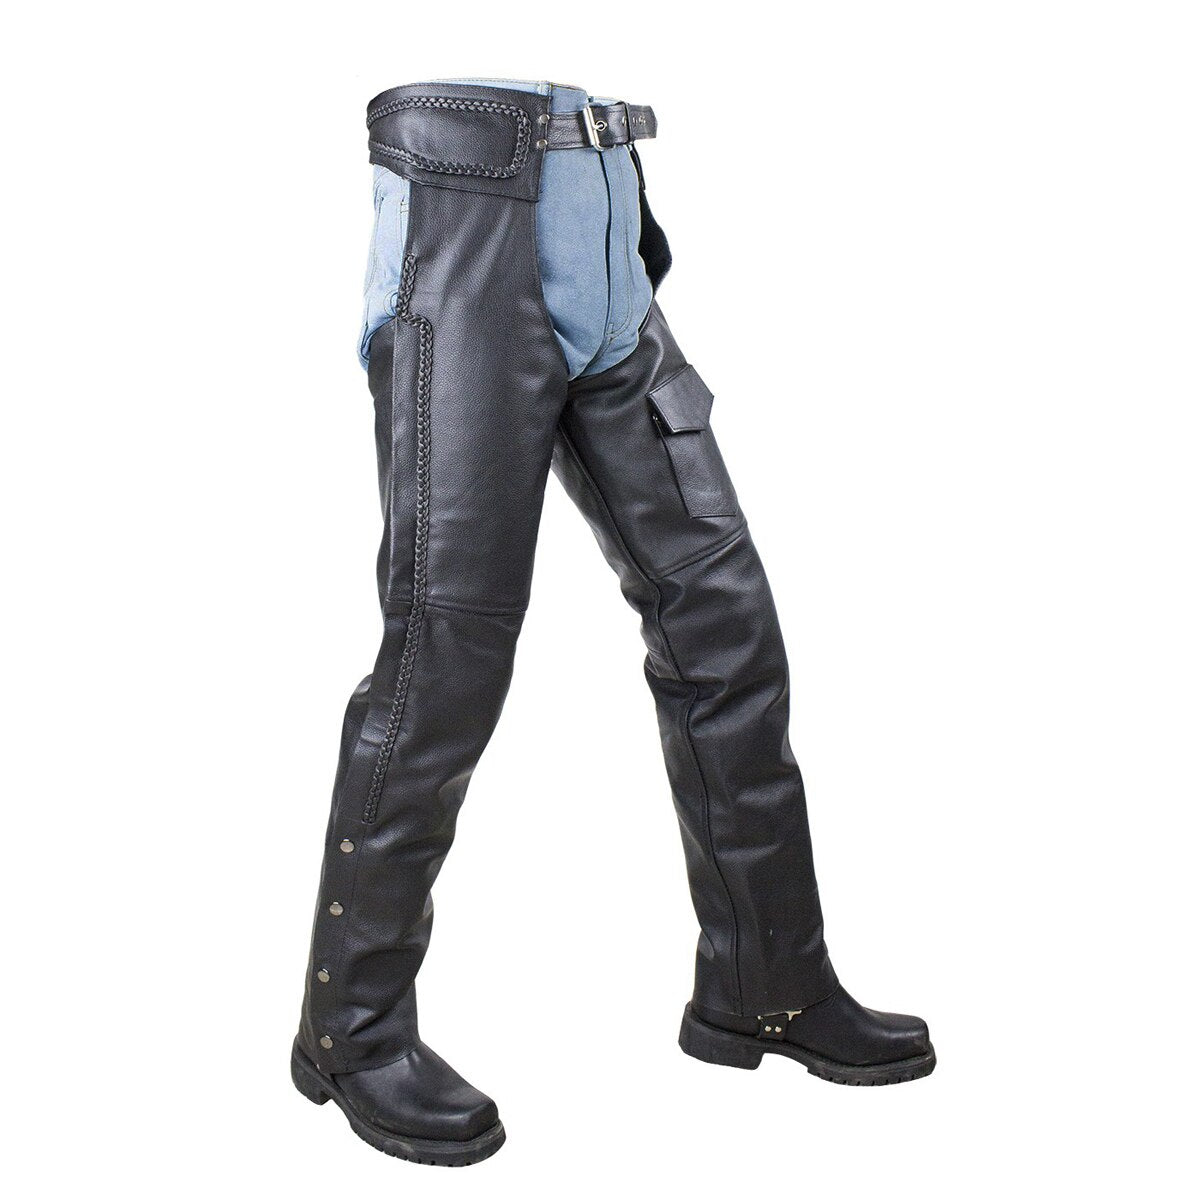 Vance Leather Top Grain Leather Chaps with Braid Trim